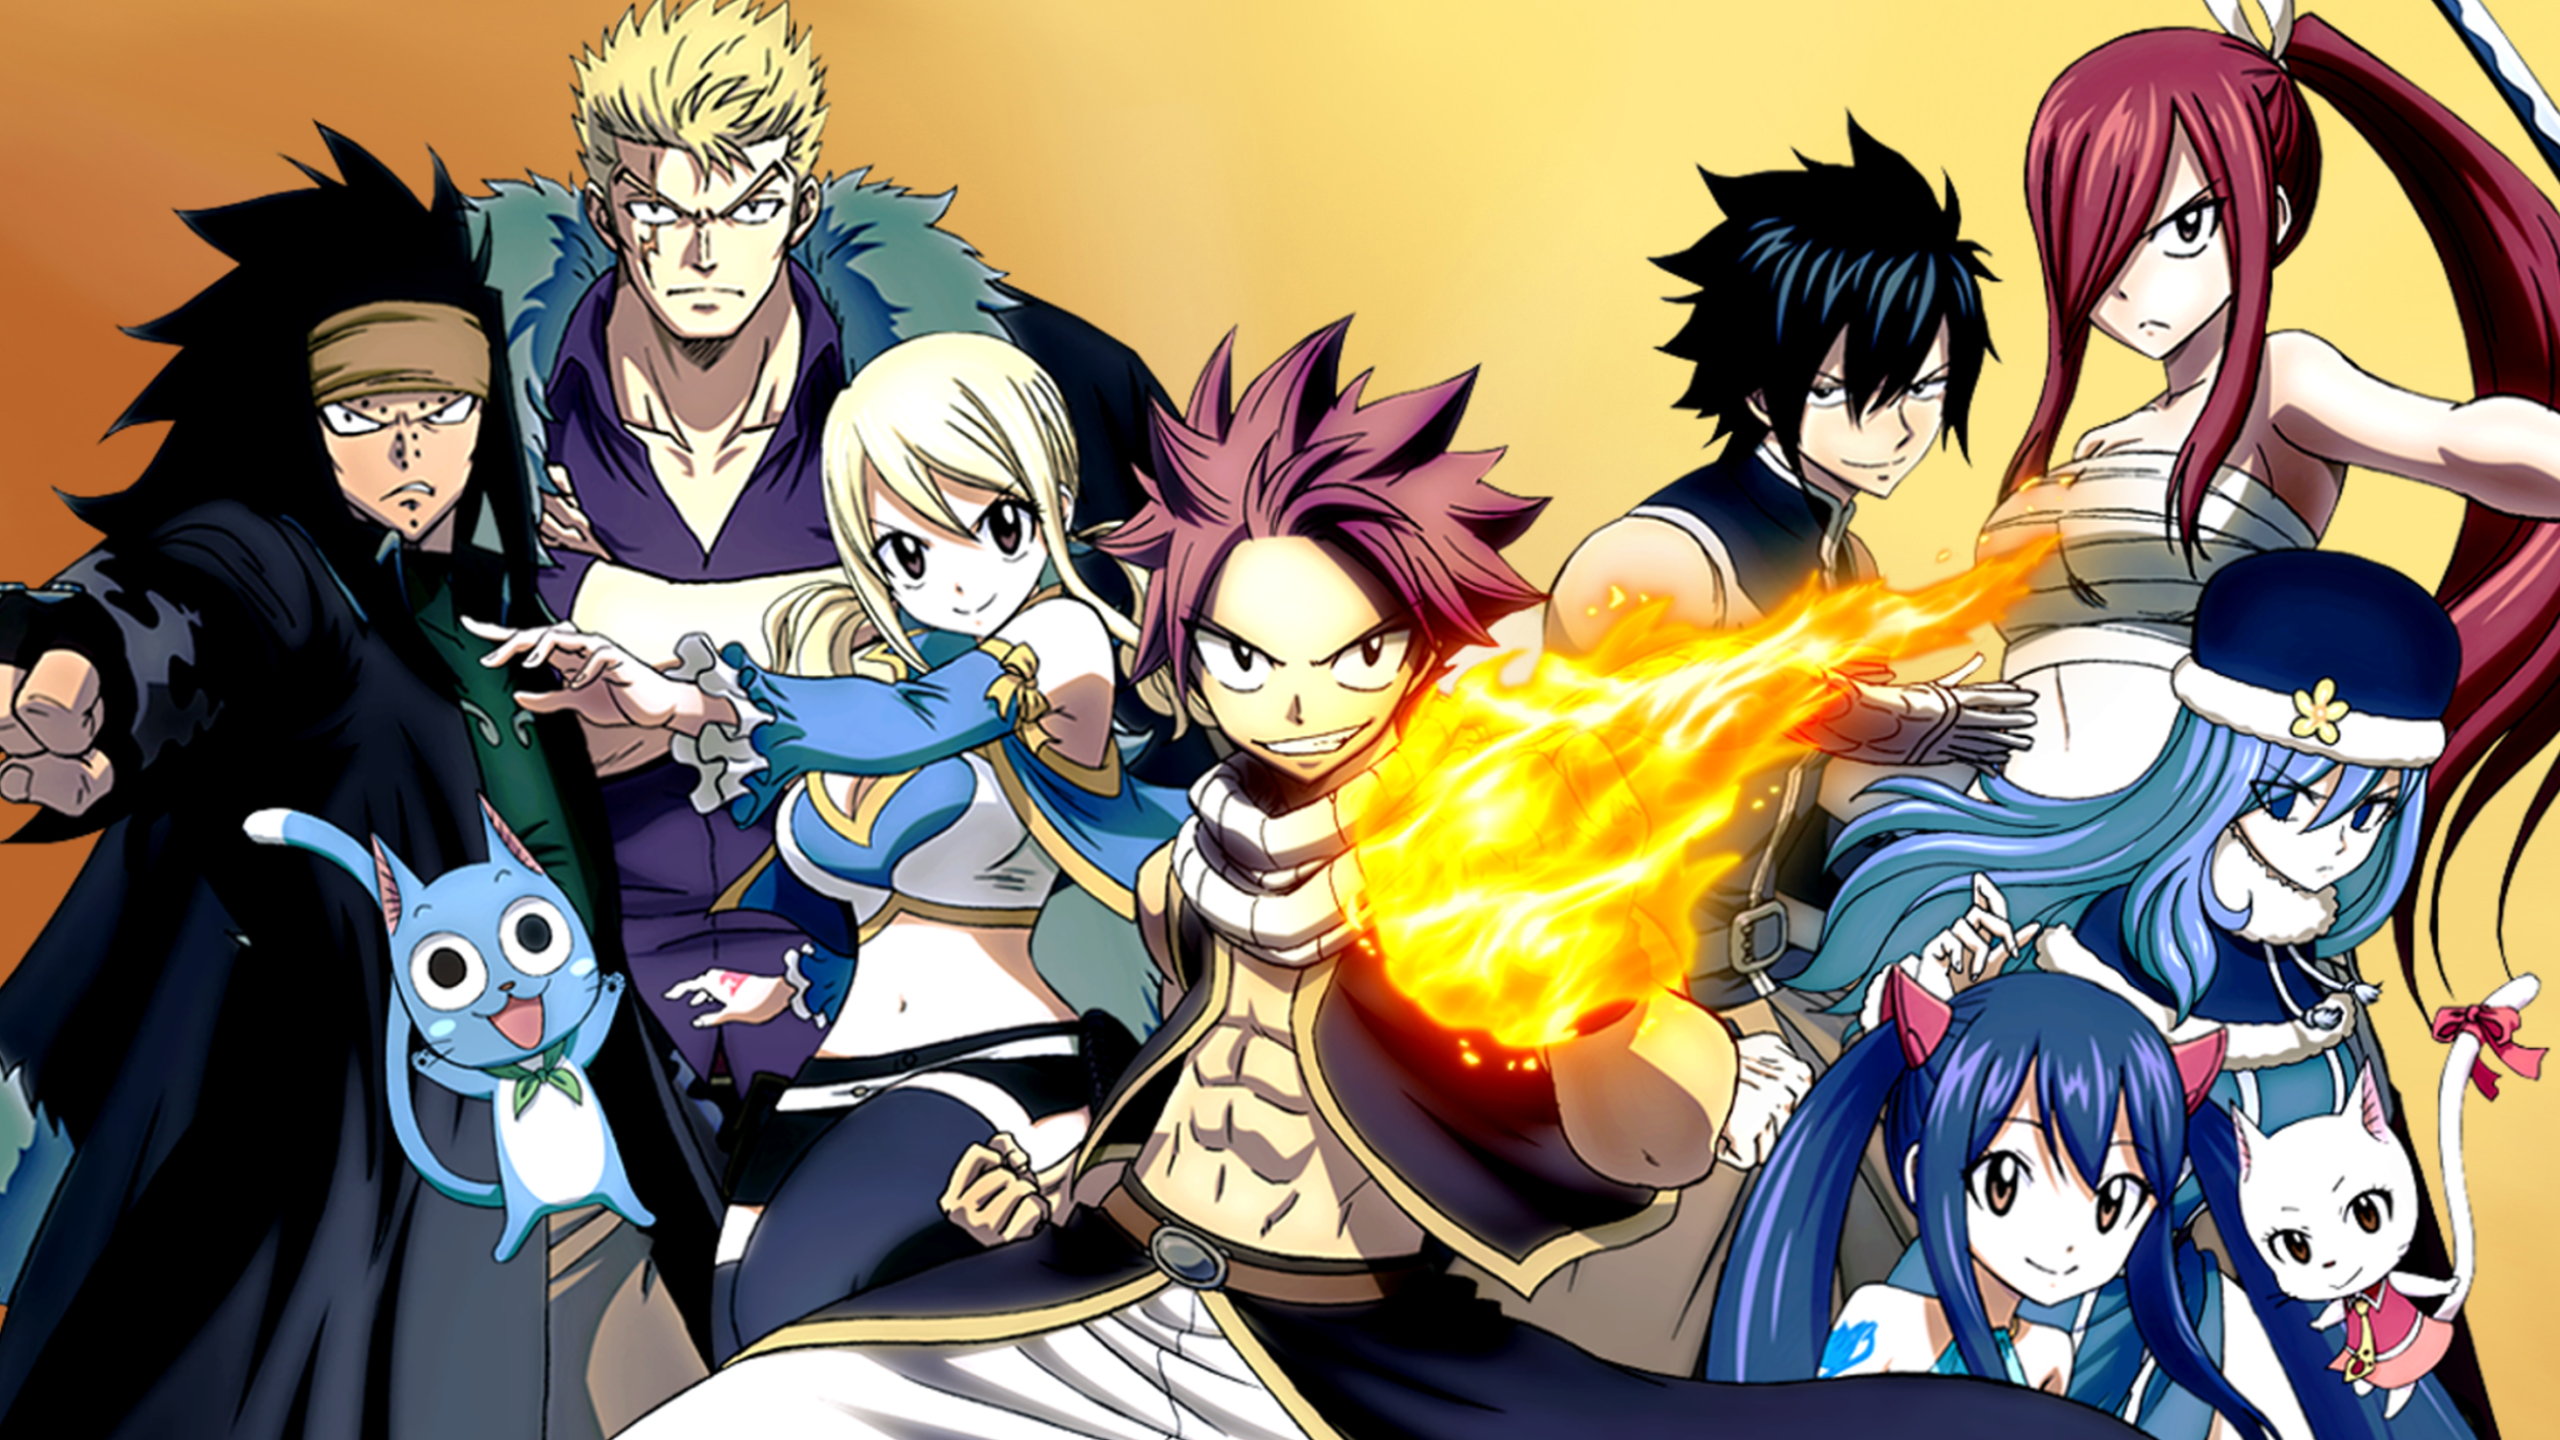 Free Download Fairy Tail Computer Wallpapers Desktop Backgrounds X Fairy Tail 2560x1440 For Your Desktop Mobile Tablet Explore 53 Season Wallpaper For Desktop Computer Fall Season Wallpaper Seasons Wallpapers